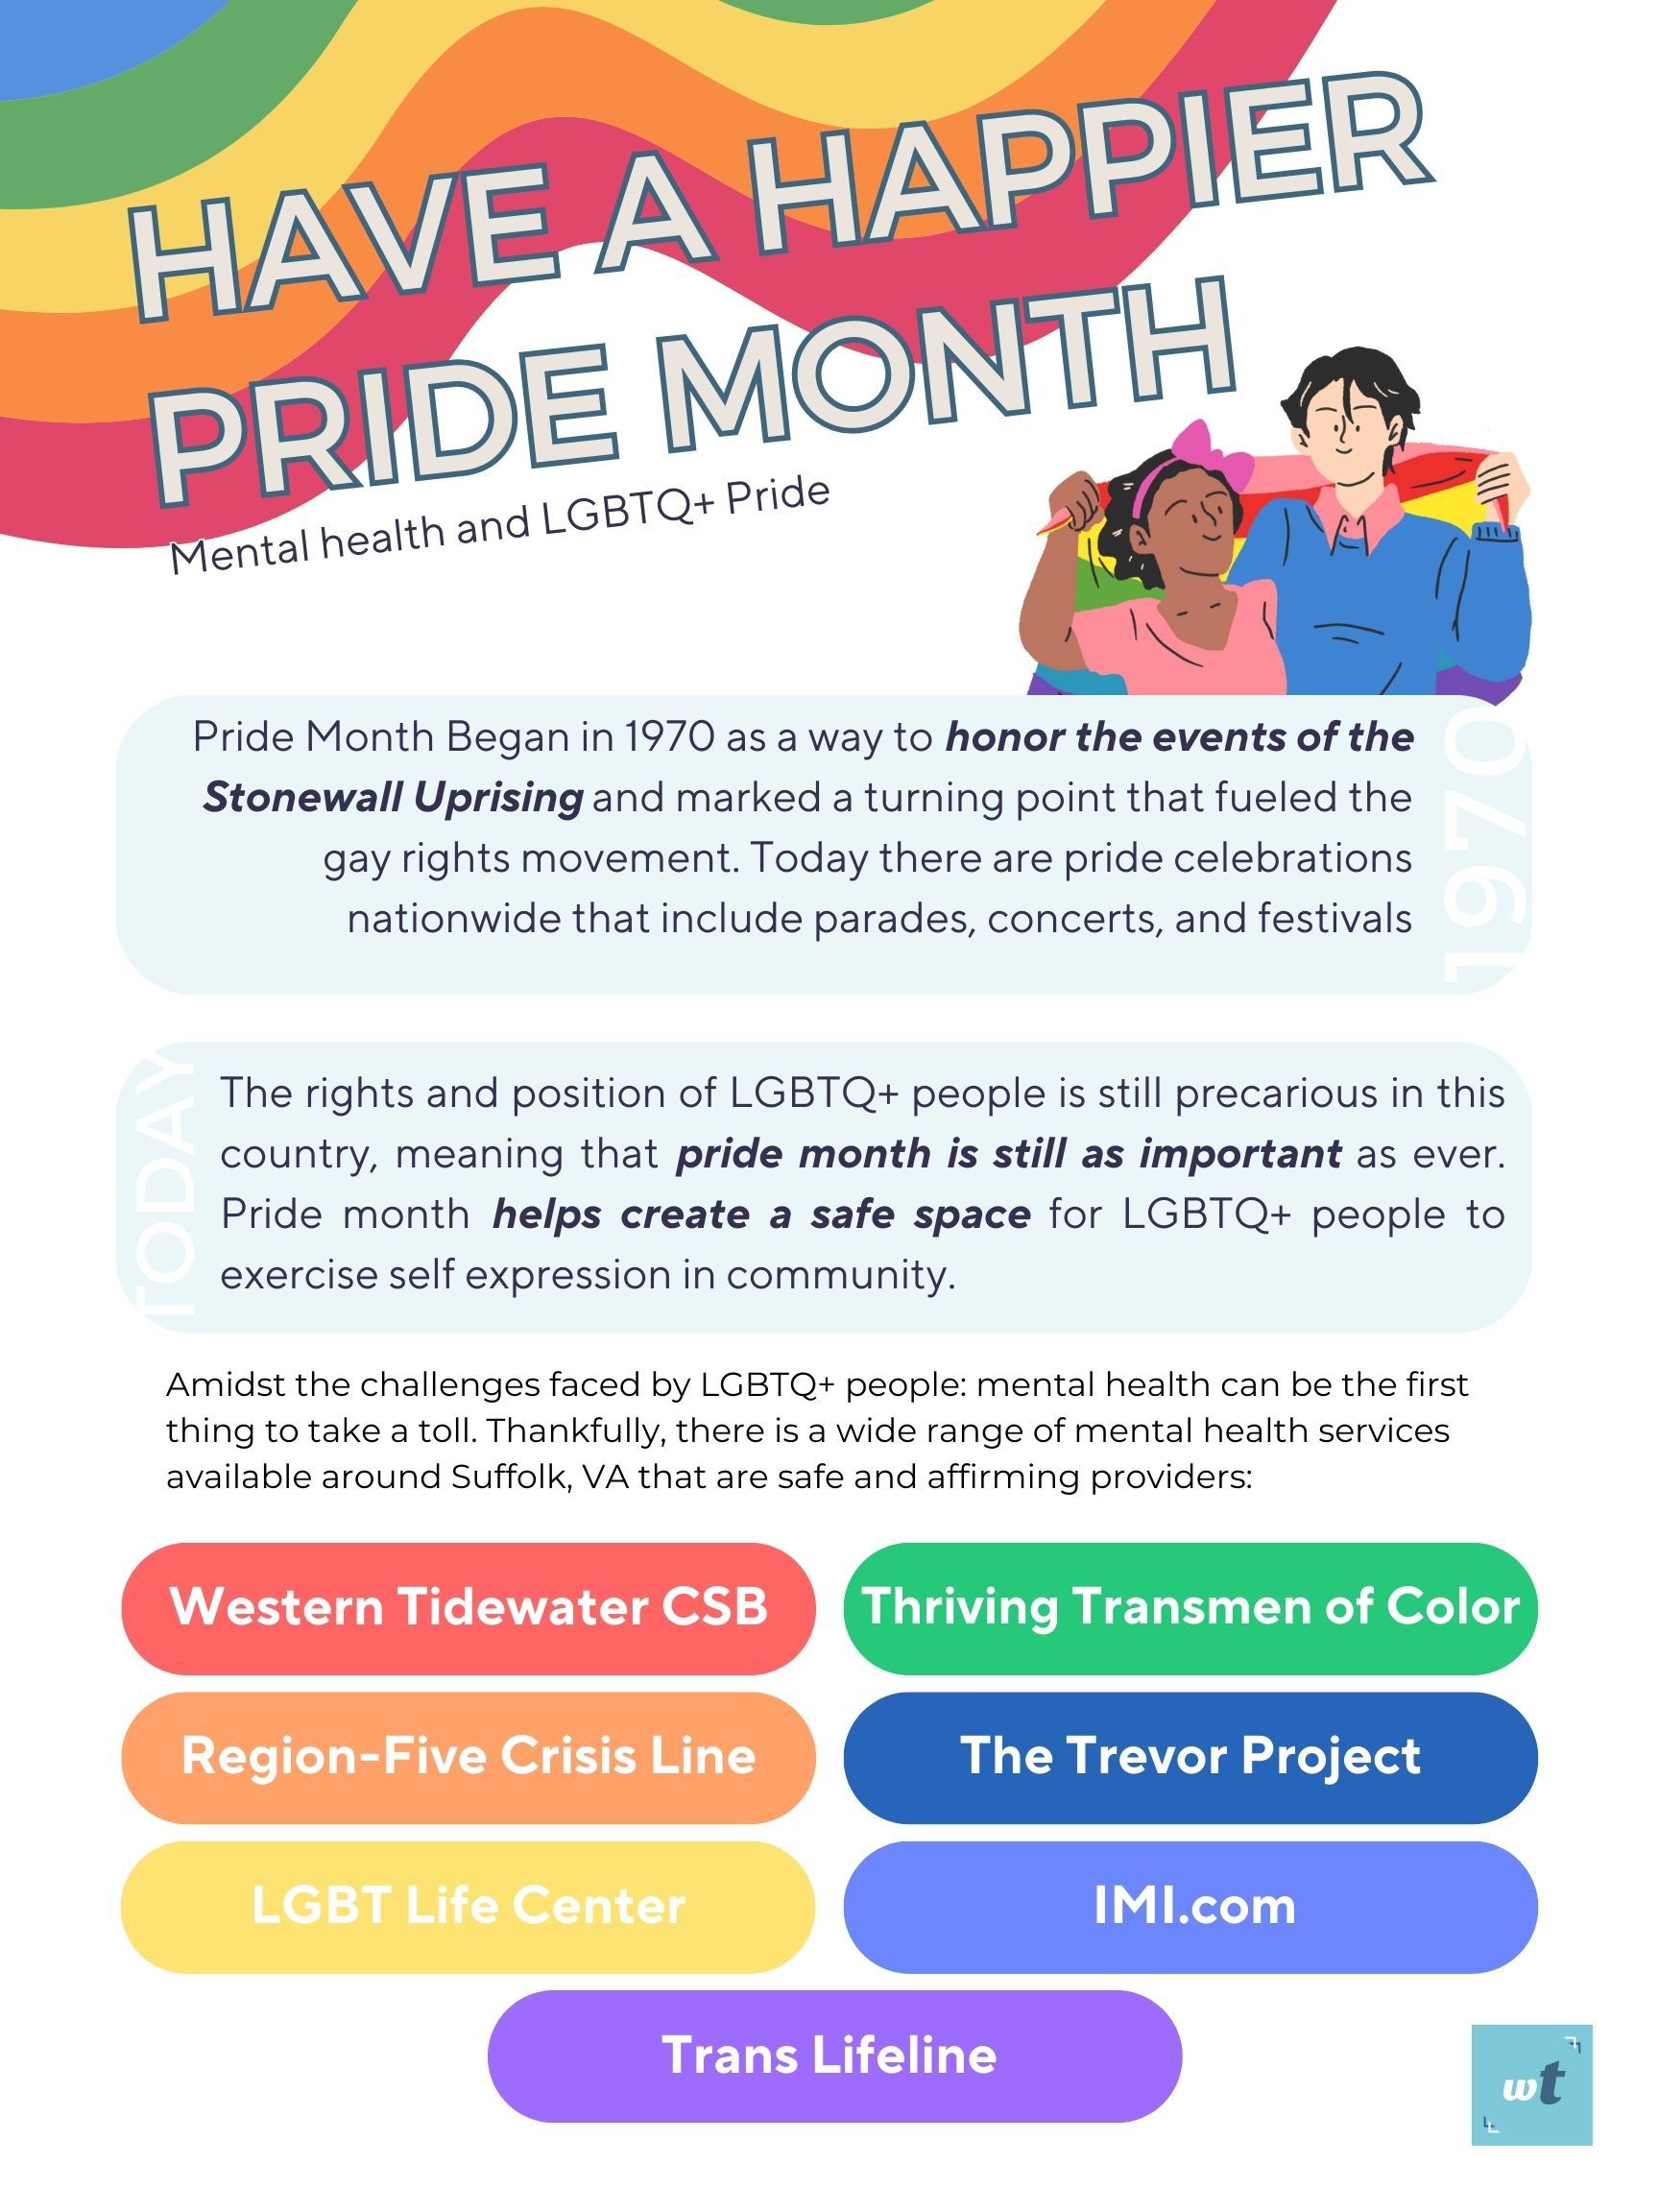 Infographic titled - Have a Happier Pride Month: Mental Health and LGBTQ+ Pride